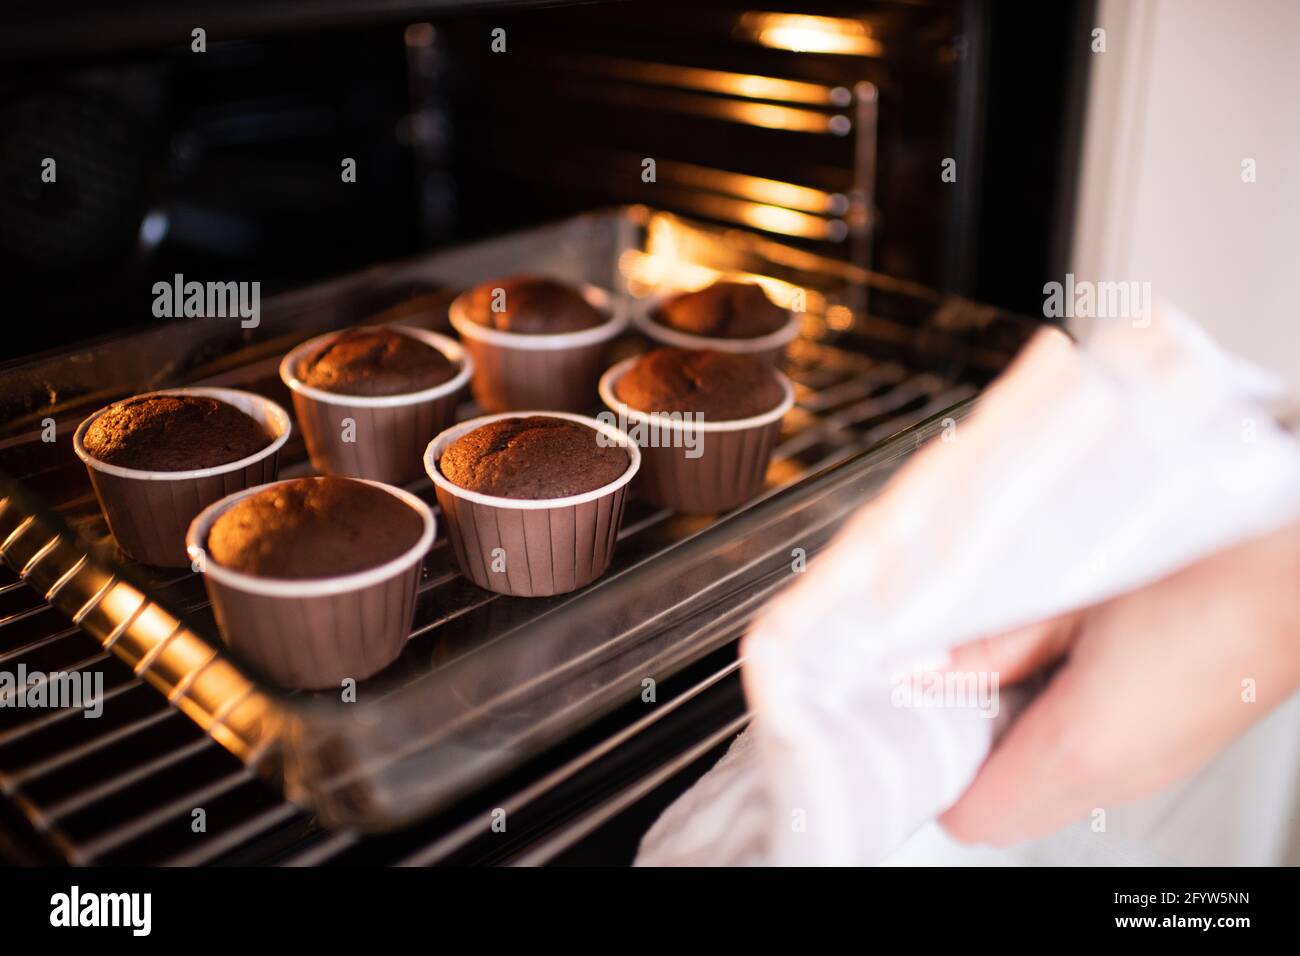 https://c8.alamy.com/comp/2FYW5NN/woman-baking-chocolate-cup-cakes-in-glass-tray-in-kitchen-closeup-young-girl-put-muffins-in-hot-over-female-cooking-tasty-snack-pastry-at-home-hea-2FYW5NN.jpg